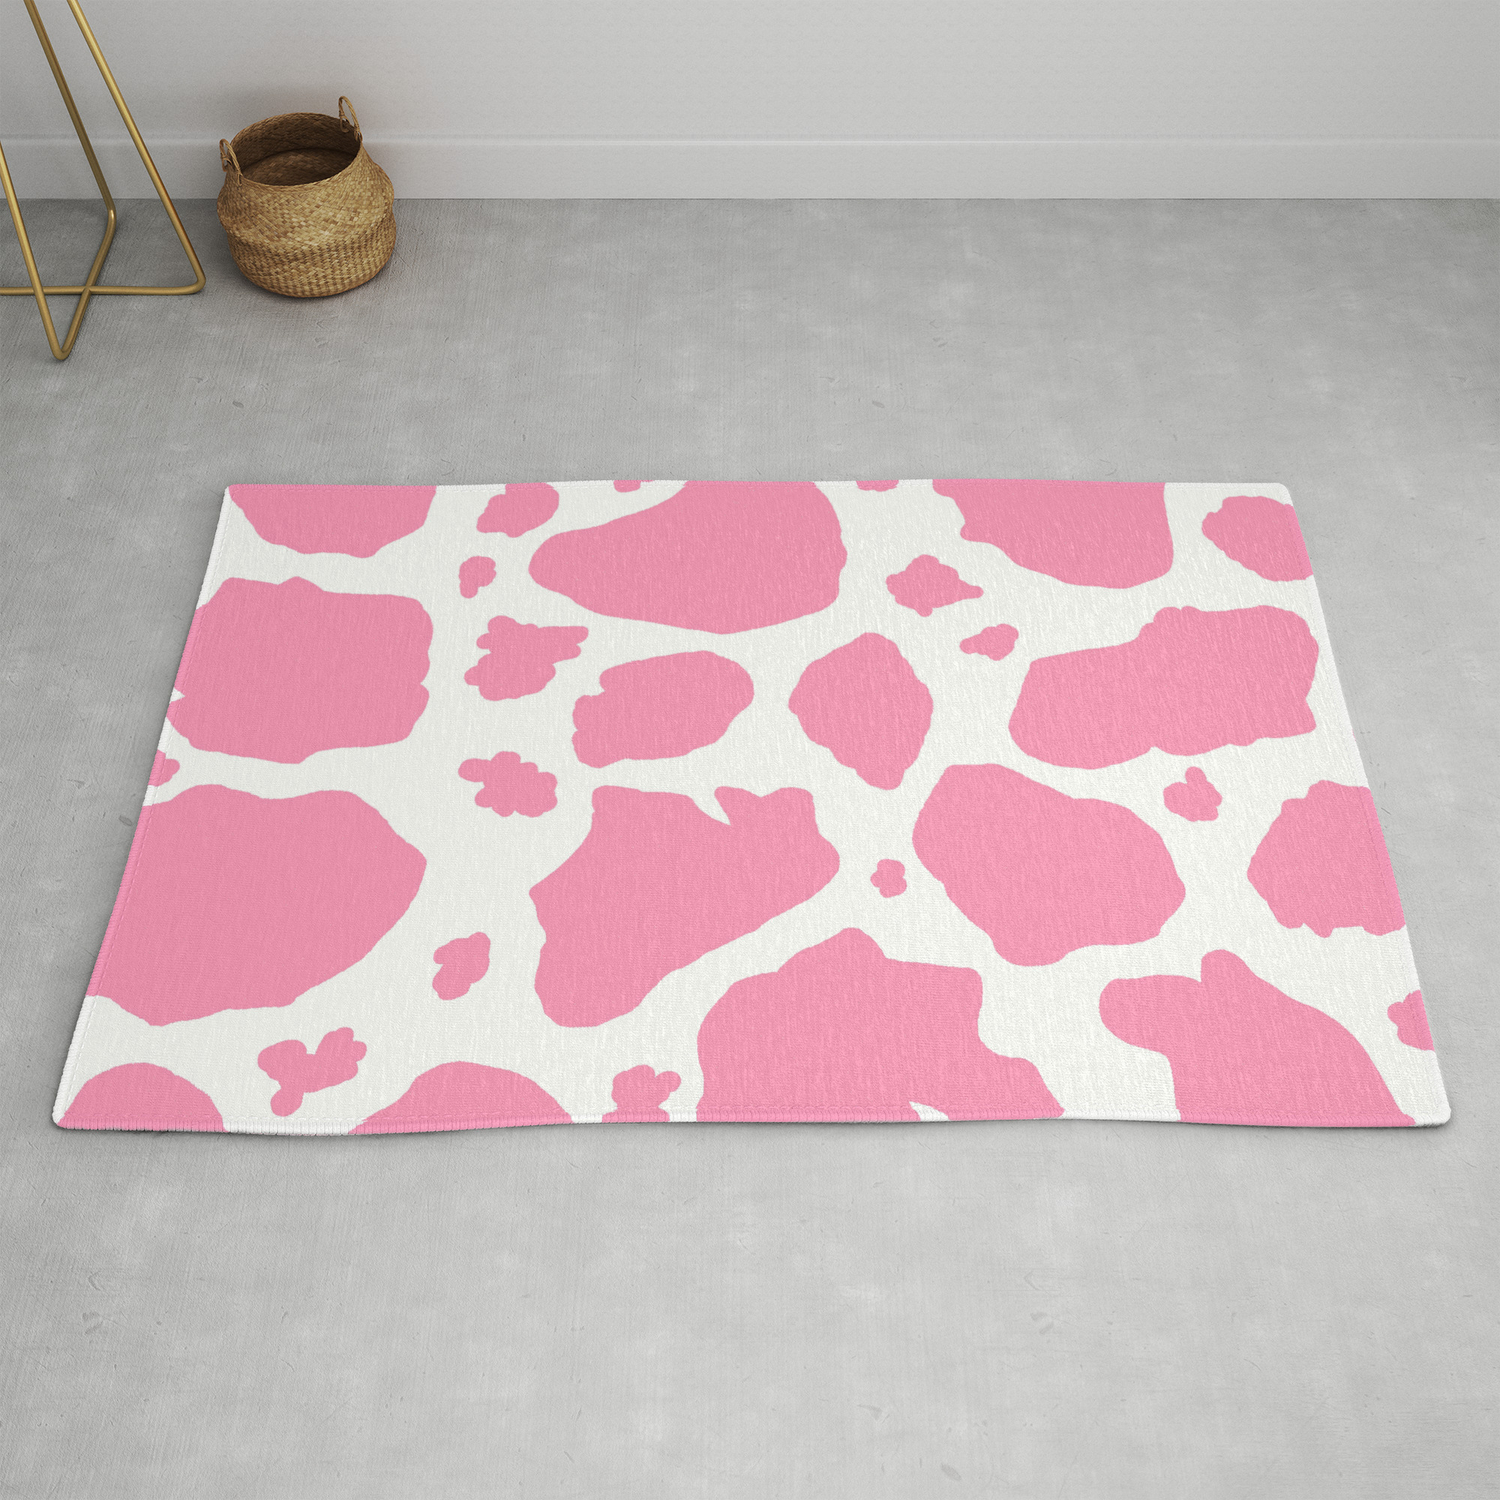 White Animal Print Cow Spots Rug, Pink And White Rugs